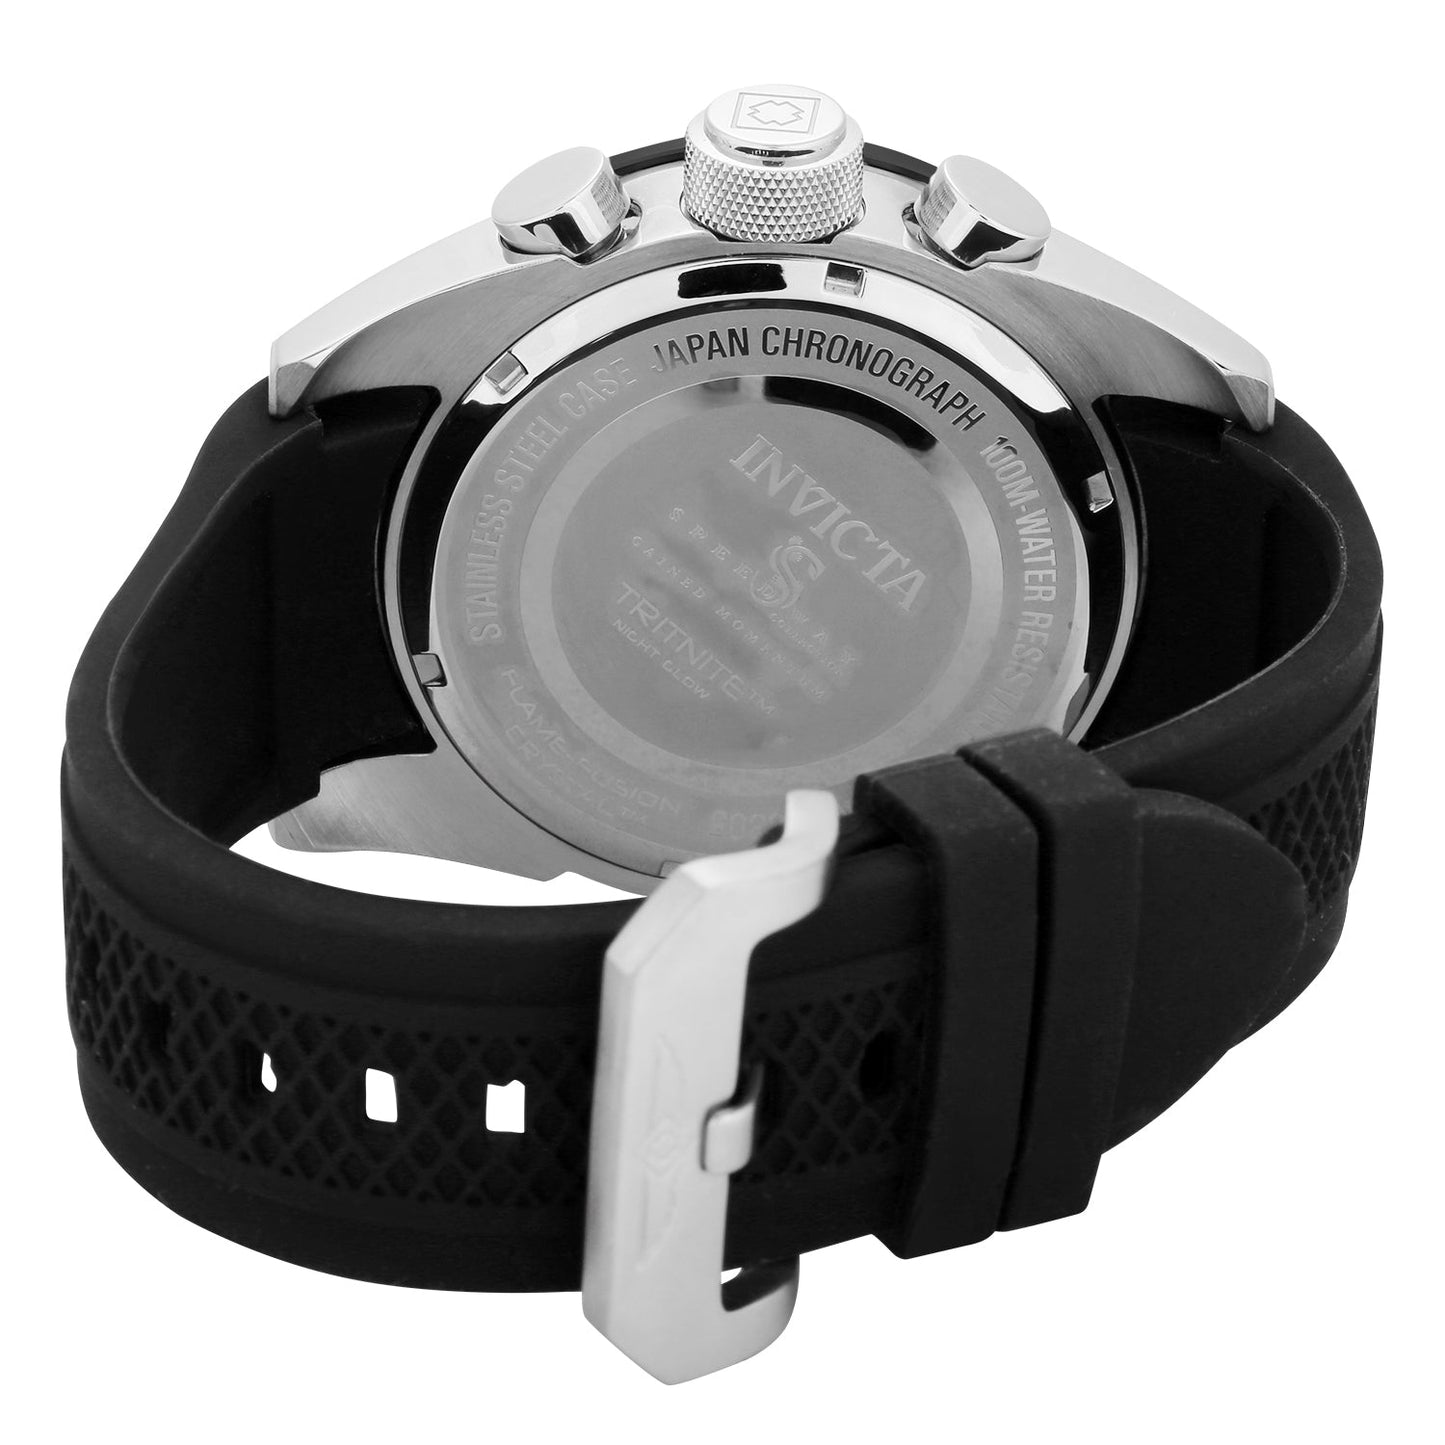 Invicta Speedway 20305 quartz watch featuring a black silicone strap and stainless steel case